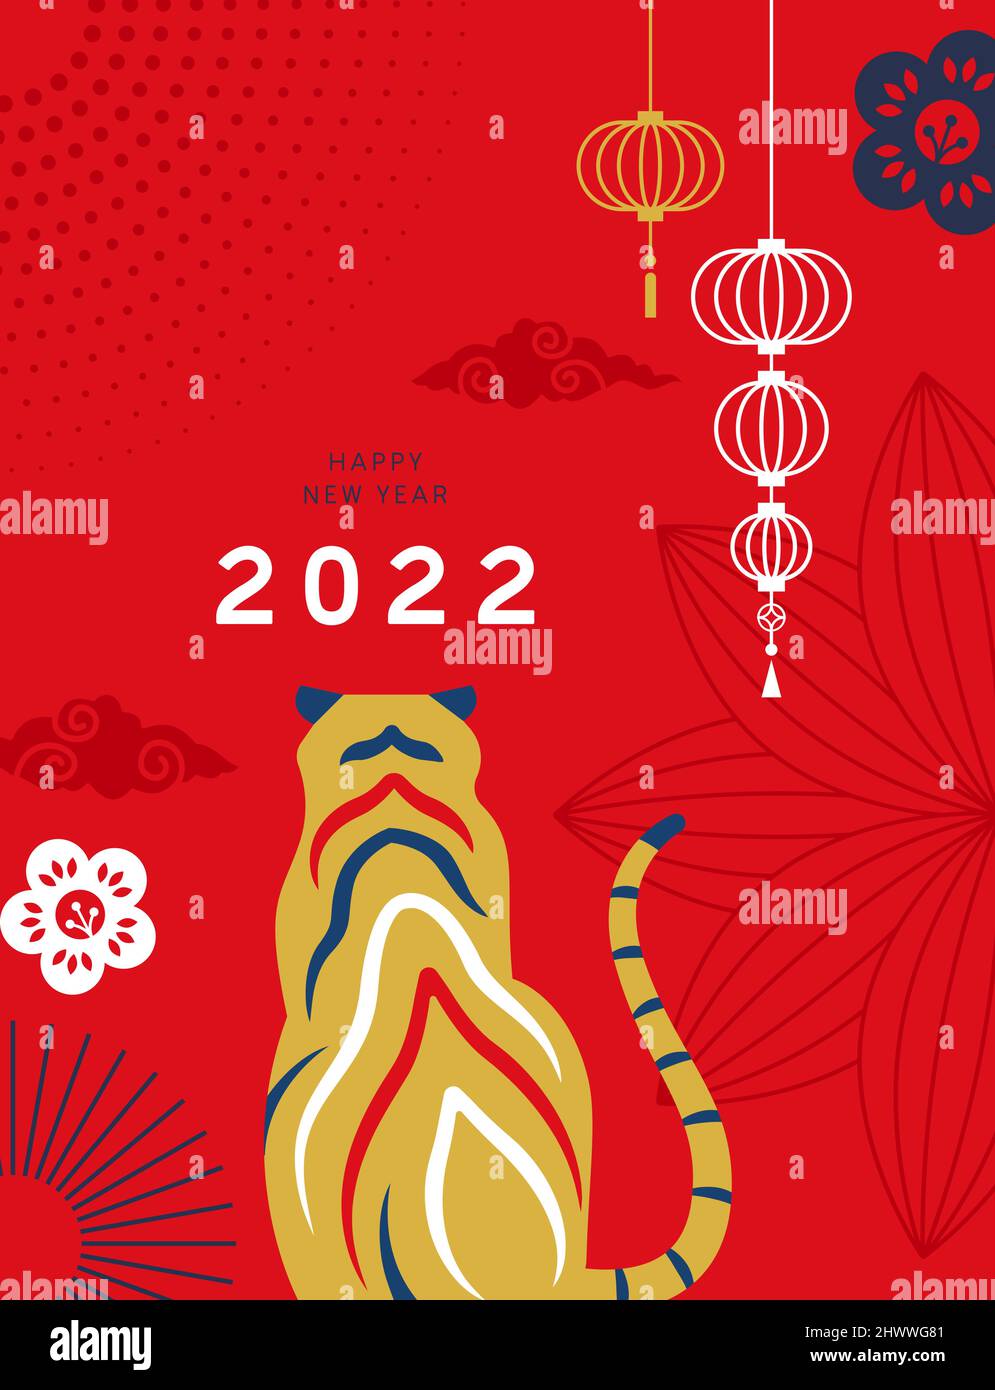 Chinese New Year 2022 greeting card illustration in modern flat geometric style. Minimalist red asian design of traditional decoration and gold tiger Stock Vector